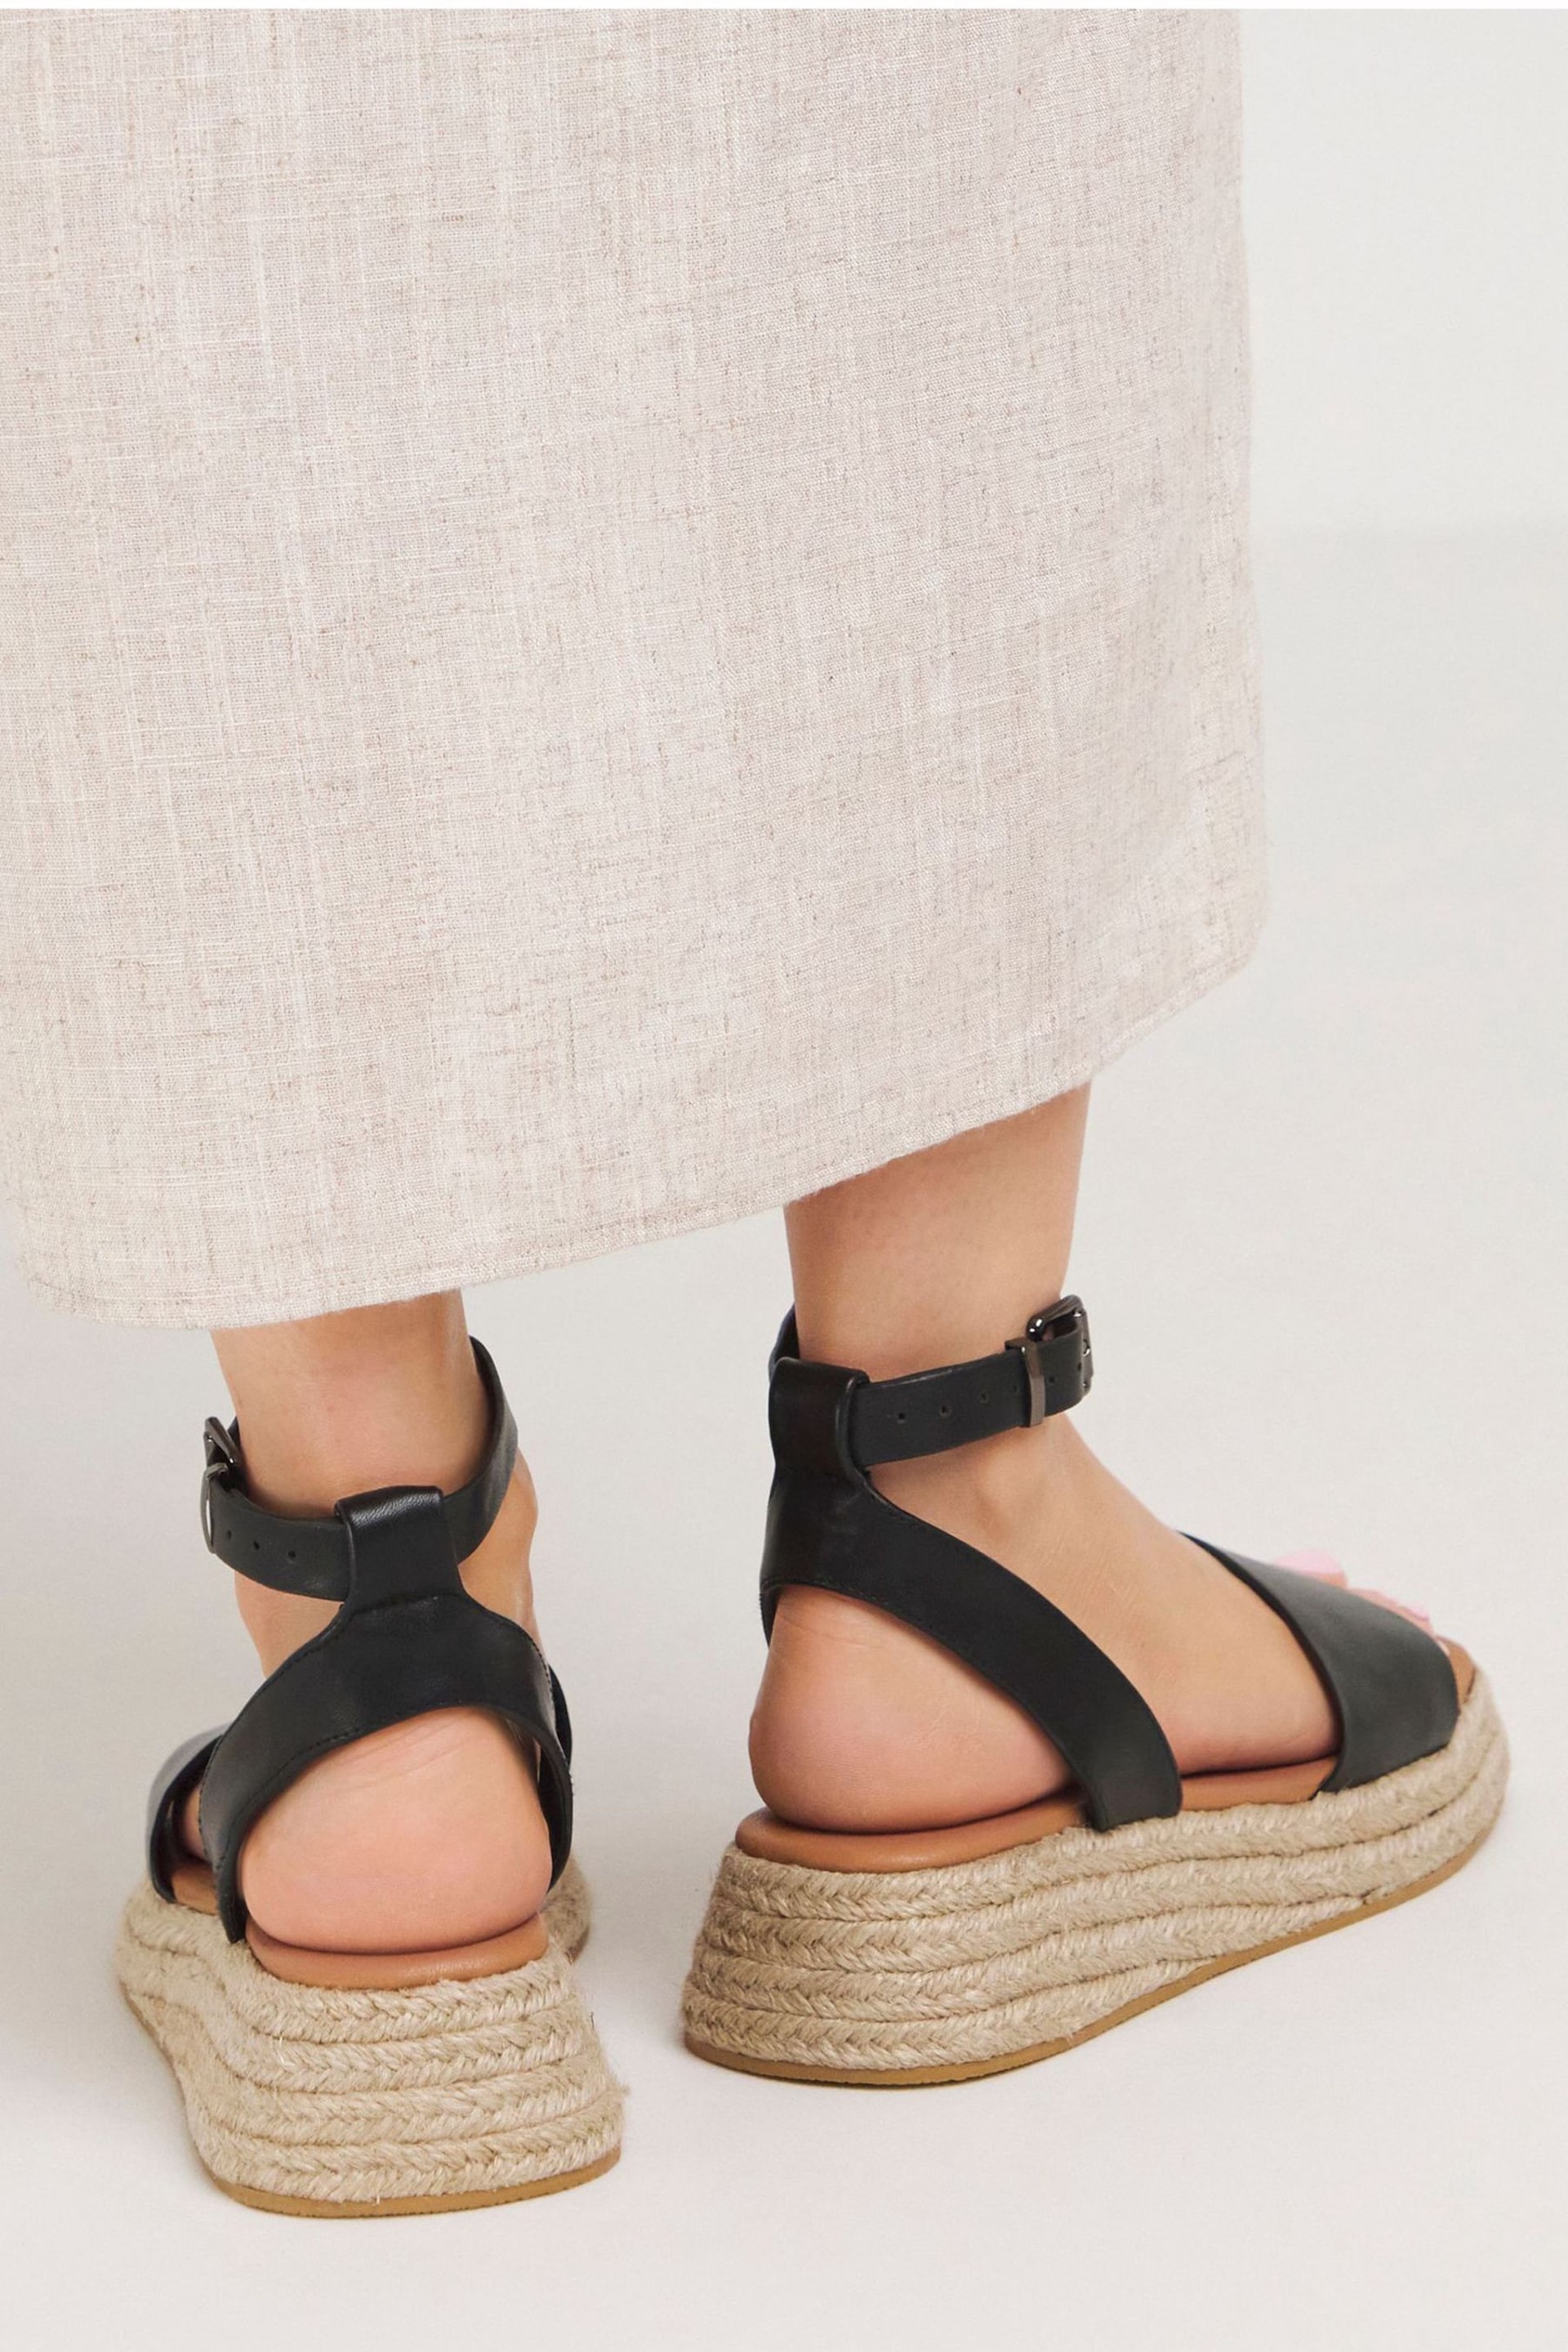 Simply Be Black Low Espadrille Wedge Two Part Sandals in Wide Fit - Image 3 of 4